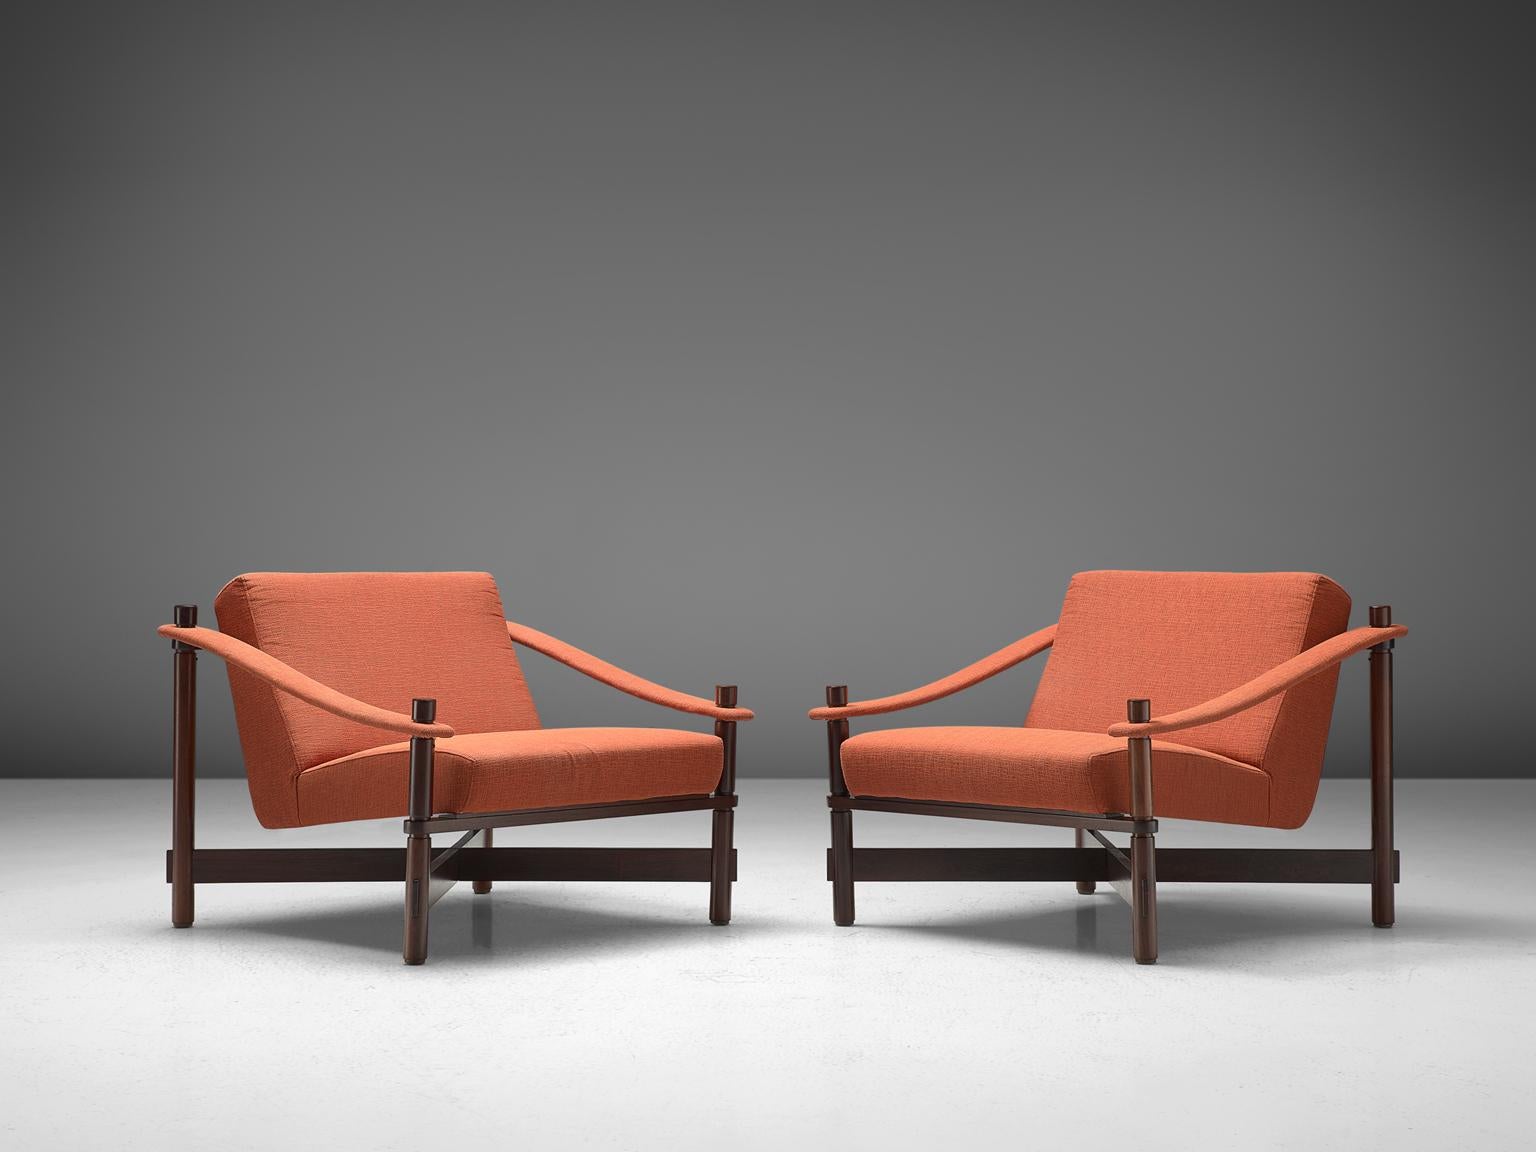 Michel Arnoult for Mobilia Contemporanea, set of Lounge Chairs, rosewood, fabric, Brazil, 1965. 

These rare Brazilian chairs are of the highest-quality in both material and design. The combination of the upholstery and the warm solid rosewood